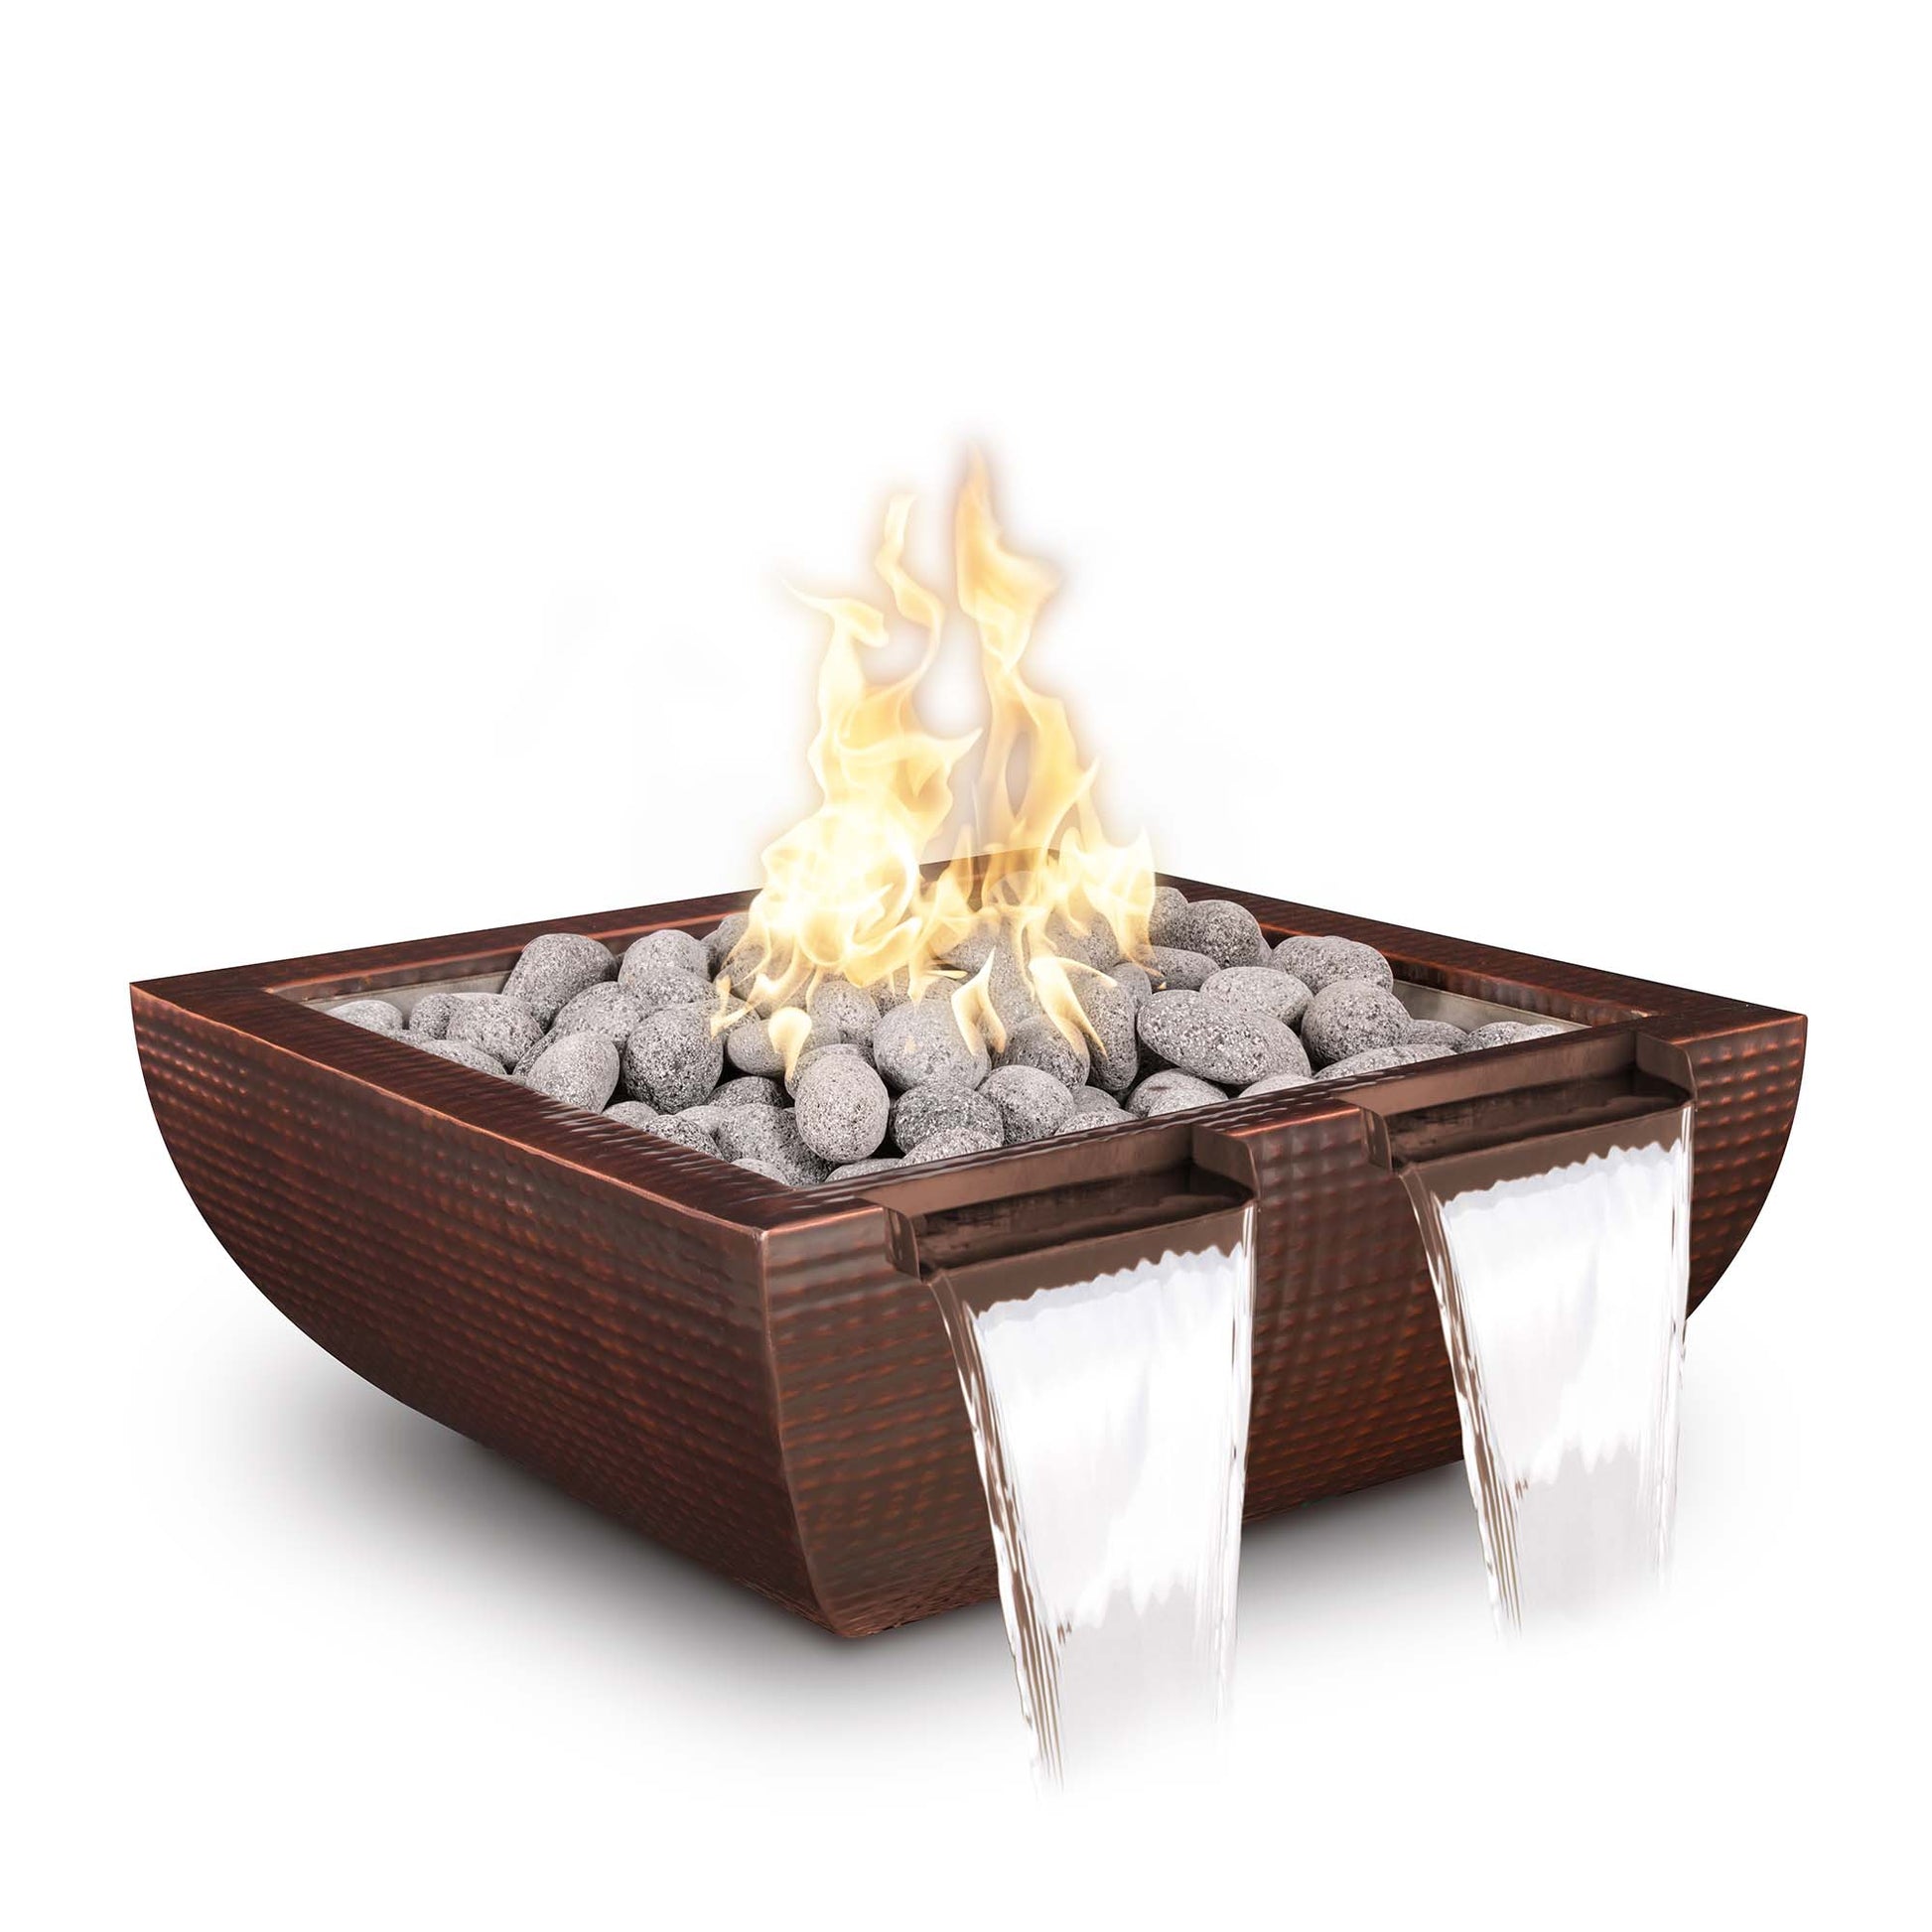 The Outdoor Plus Avalon Twin Spill 36" Copper Vein Powder Coated Metal Natural Gas Fire & Water Bowl with Match Lit with Flame Sense Ignition